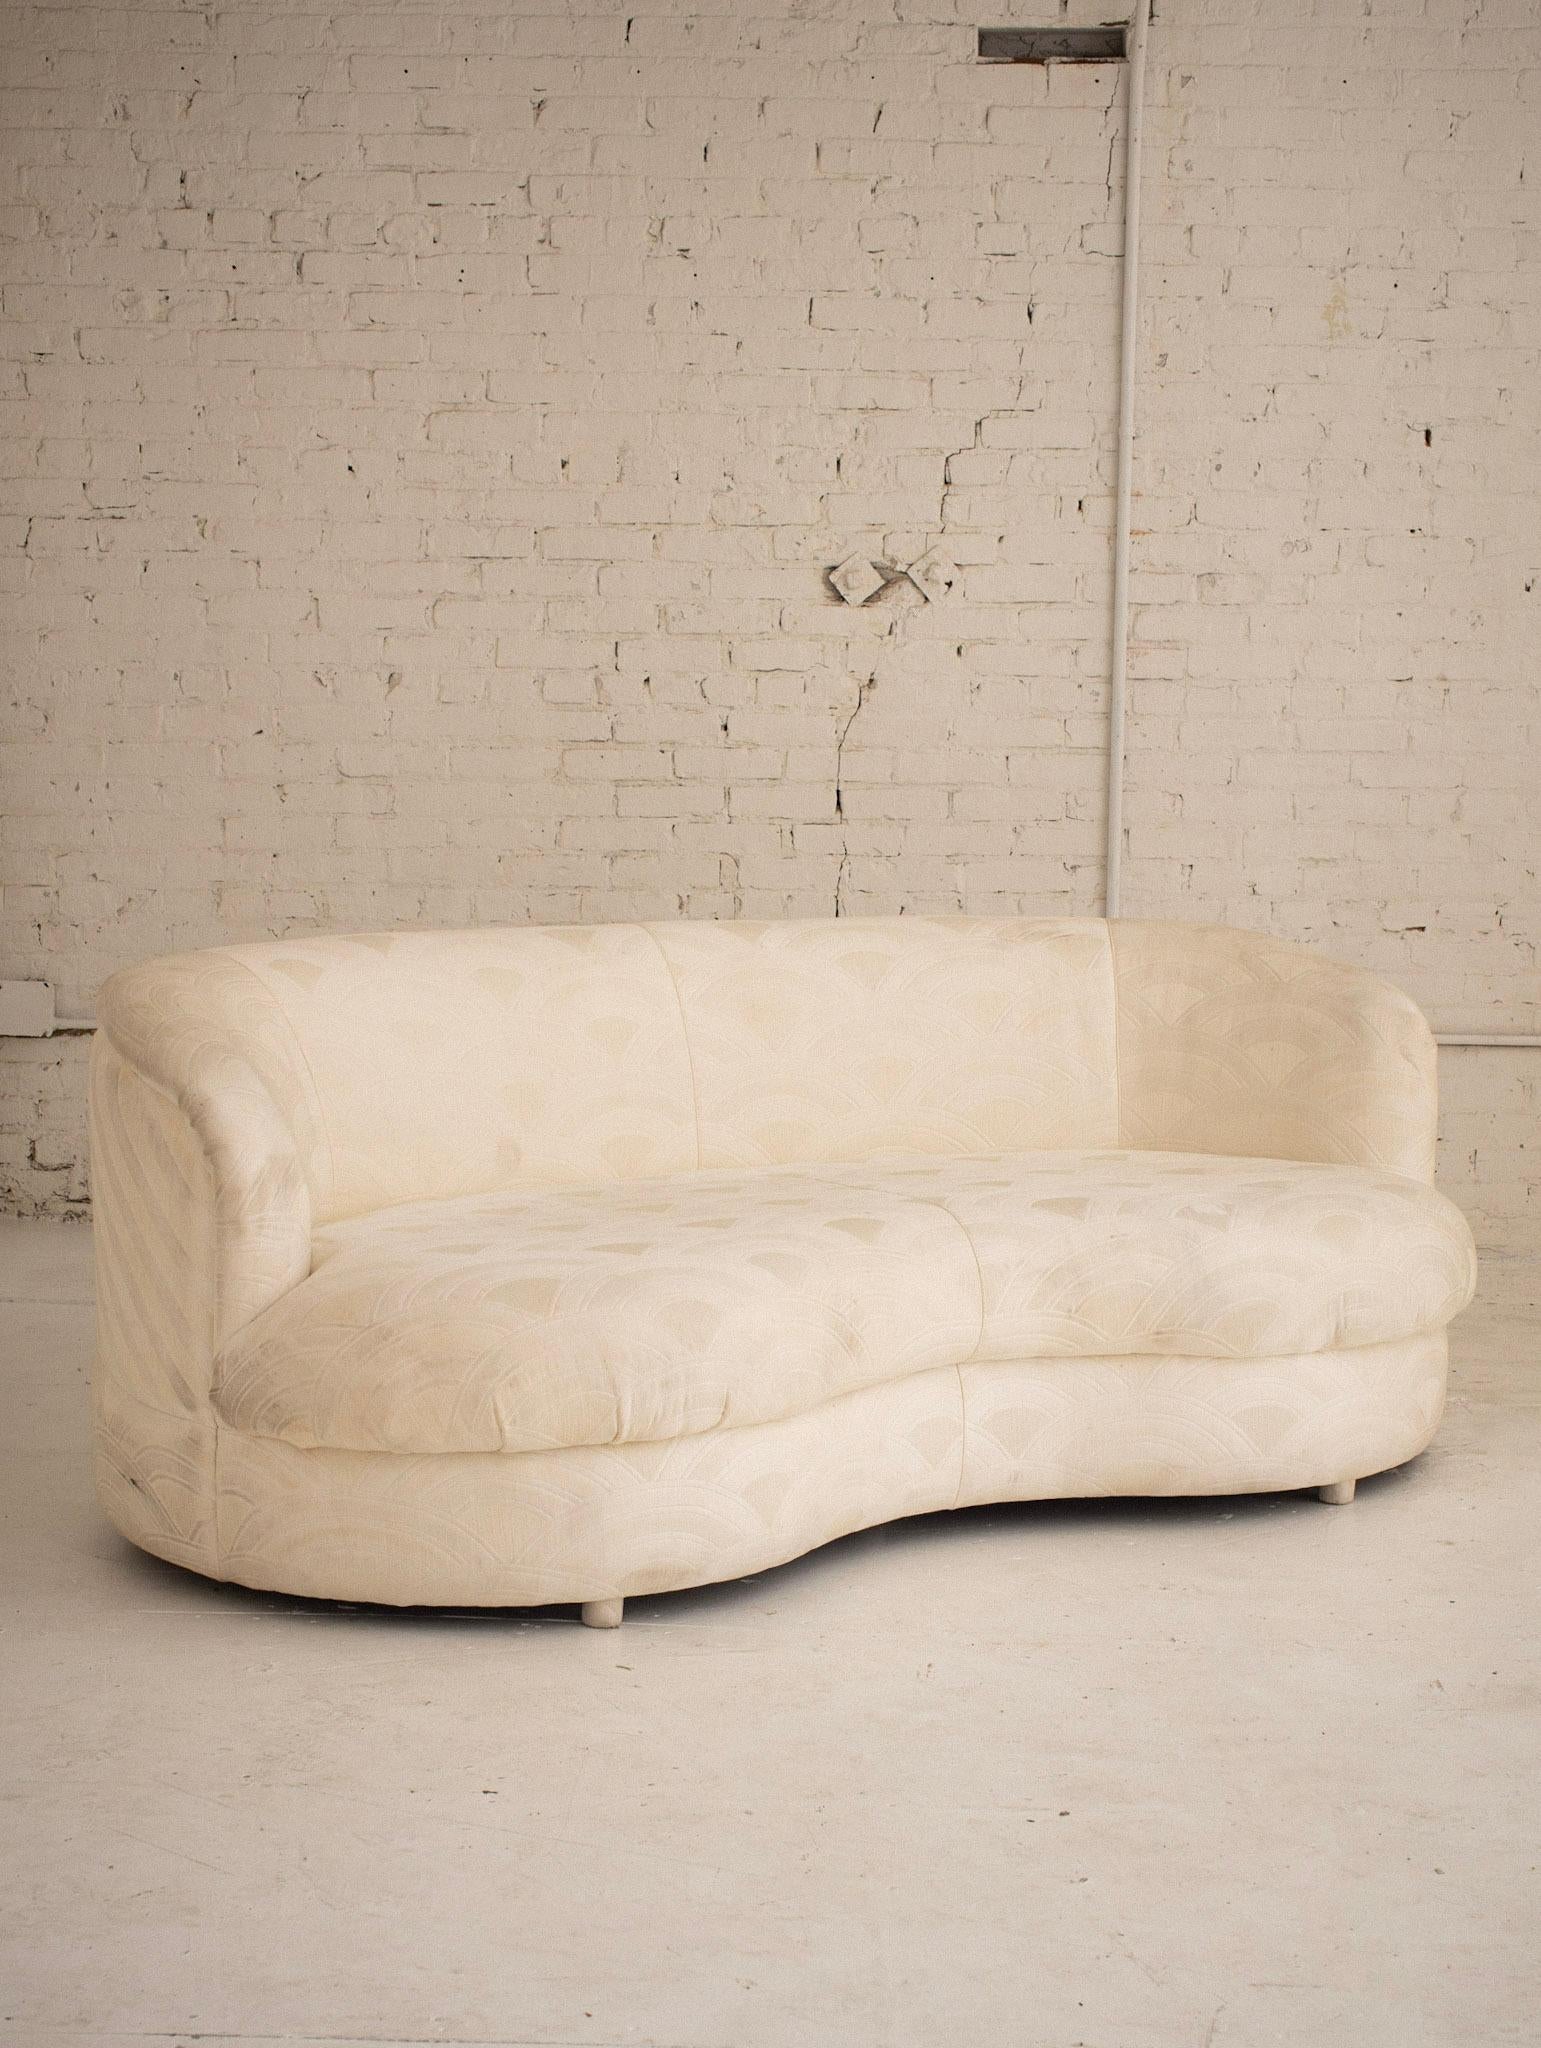 A postmodern cloud form sofa. Kidney silhouette. A deeper seat depth, ideal for lounging. Original cream upholstery with quilted detail. Reupholstery recommended. Pair available, sold separately.